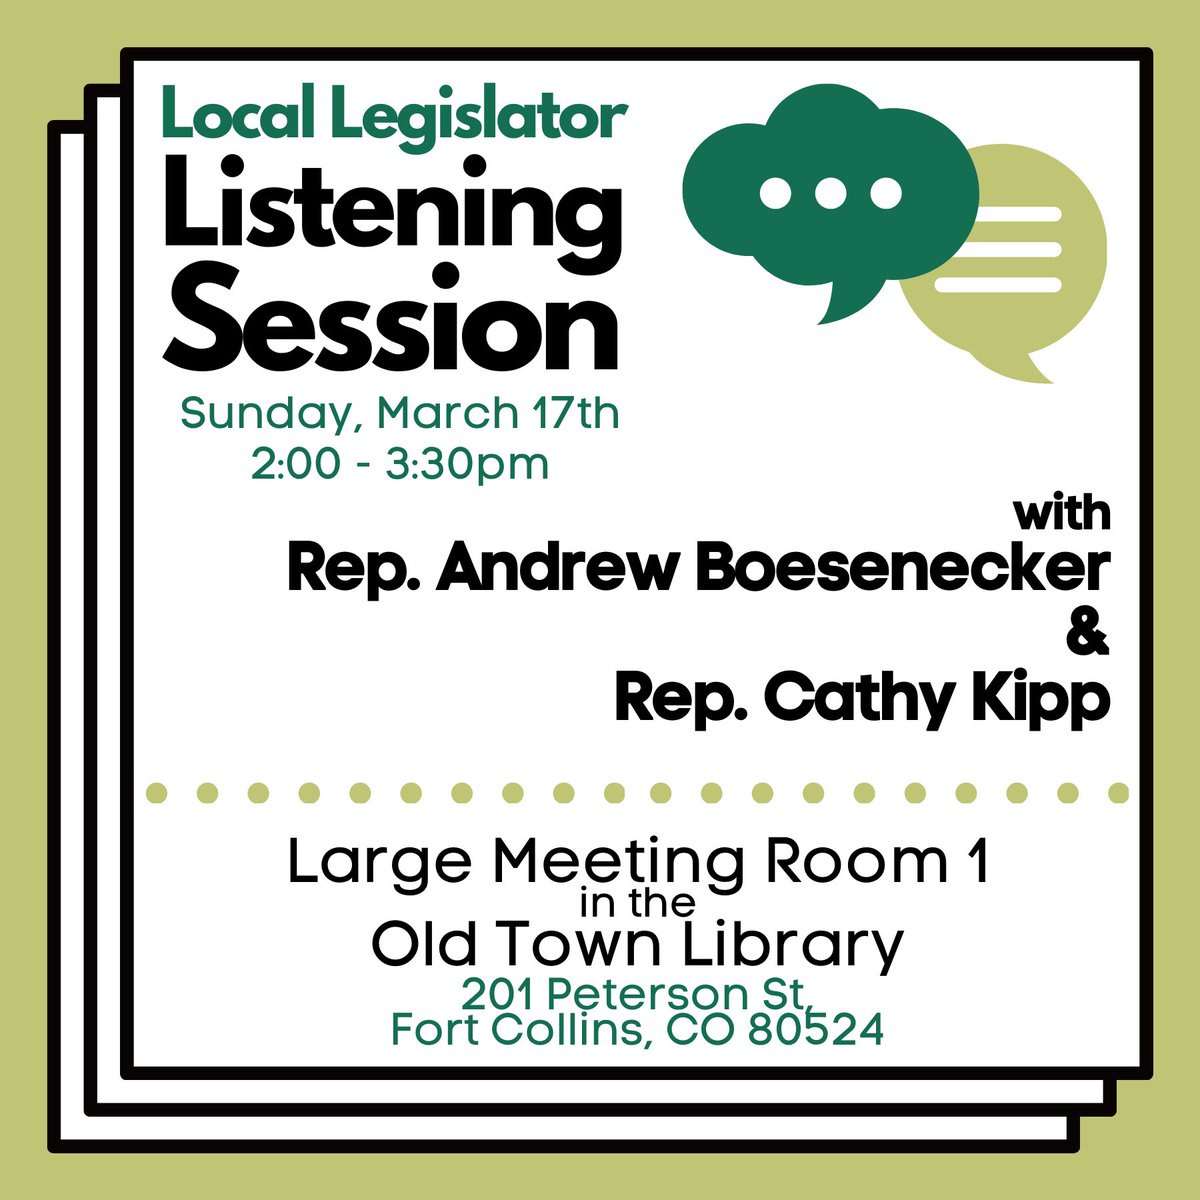 Please join Rep. Cathy Kipp and I for a Local Legislator Listening Session this Sunday at the Old Town Library. We sincerely value hearing from our communities and knowing what matters to you.